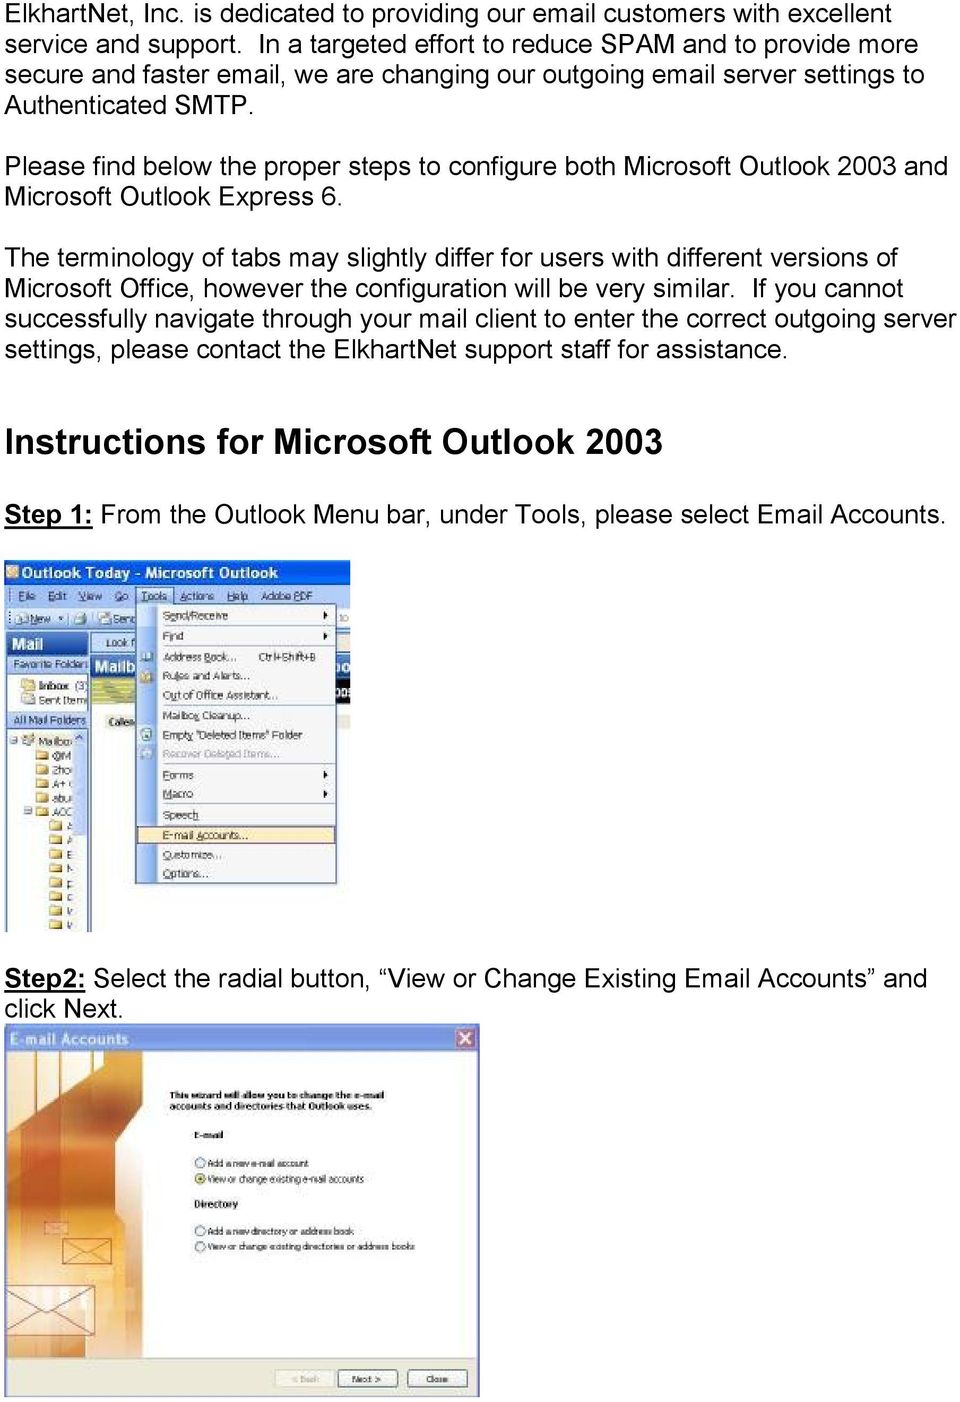 Please find below the proper steps to configure both Microsoft Outlook 2003 and Microsoft Outlook Express 6.